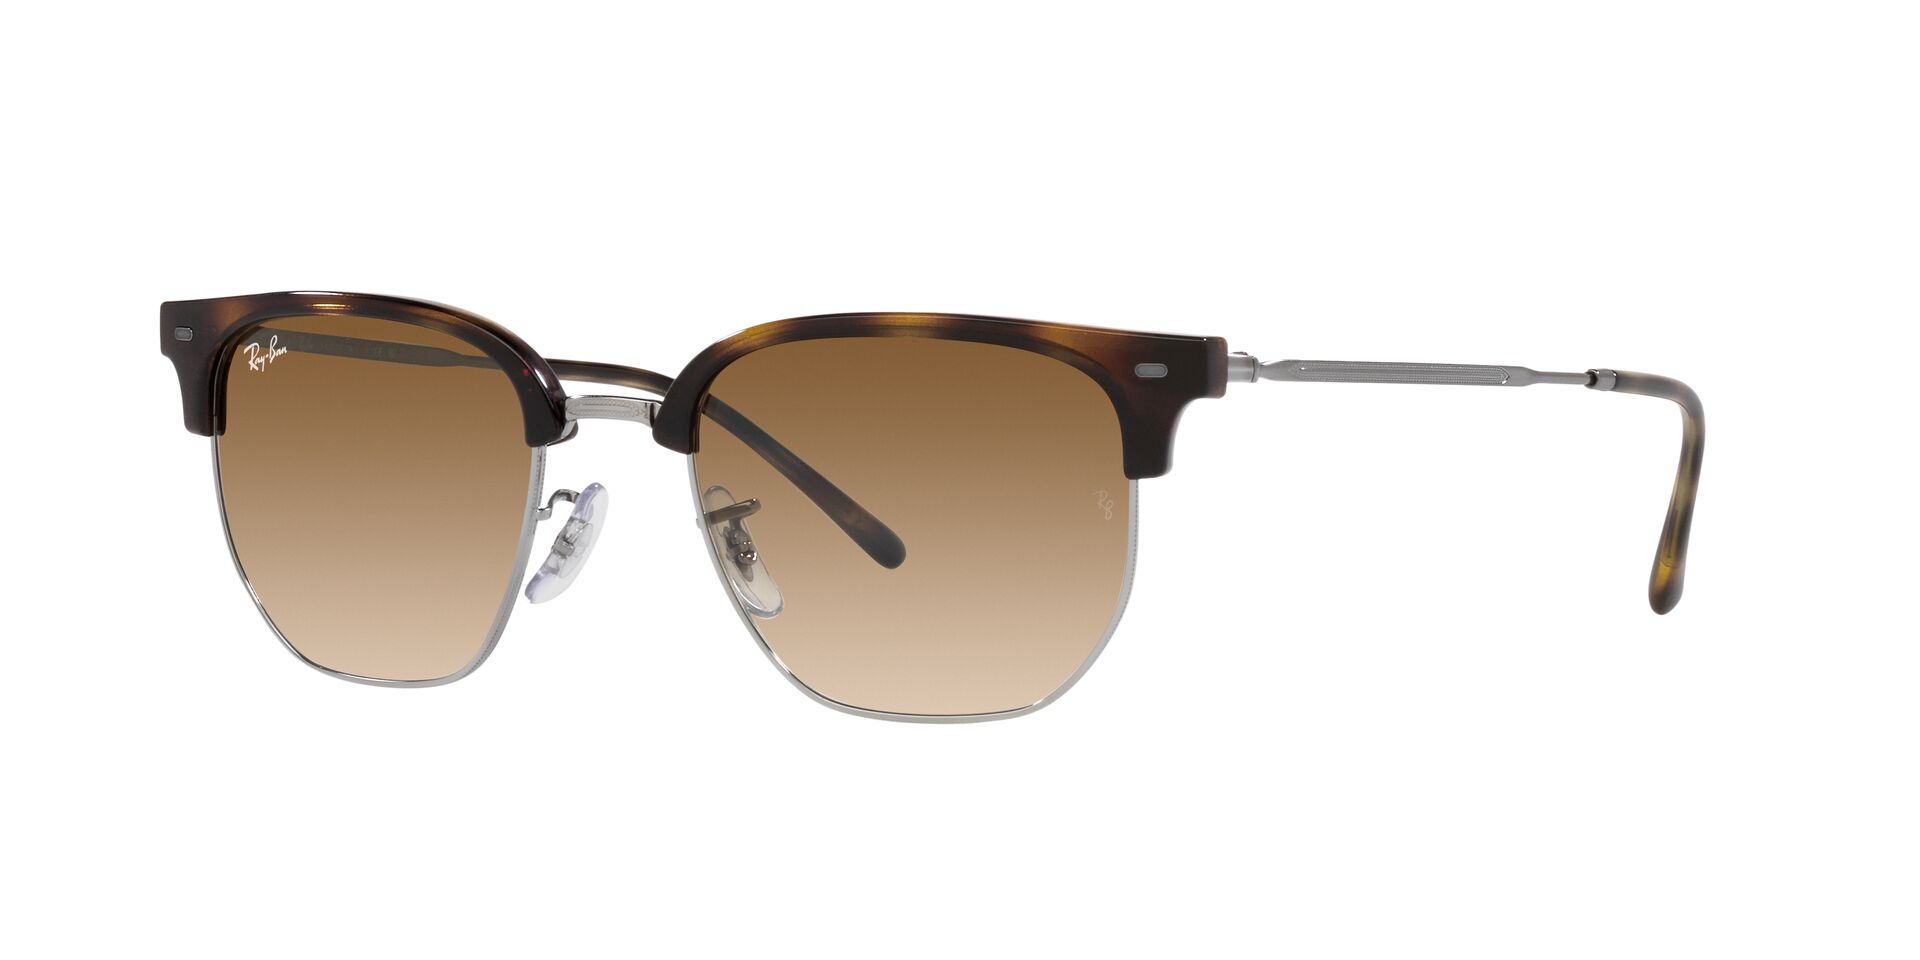 Buy Ray-Ban New Clubmaster Sunglasses Online.